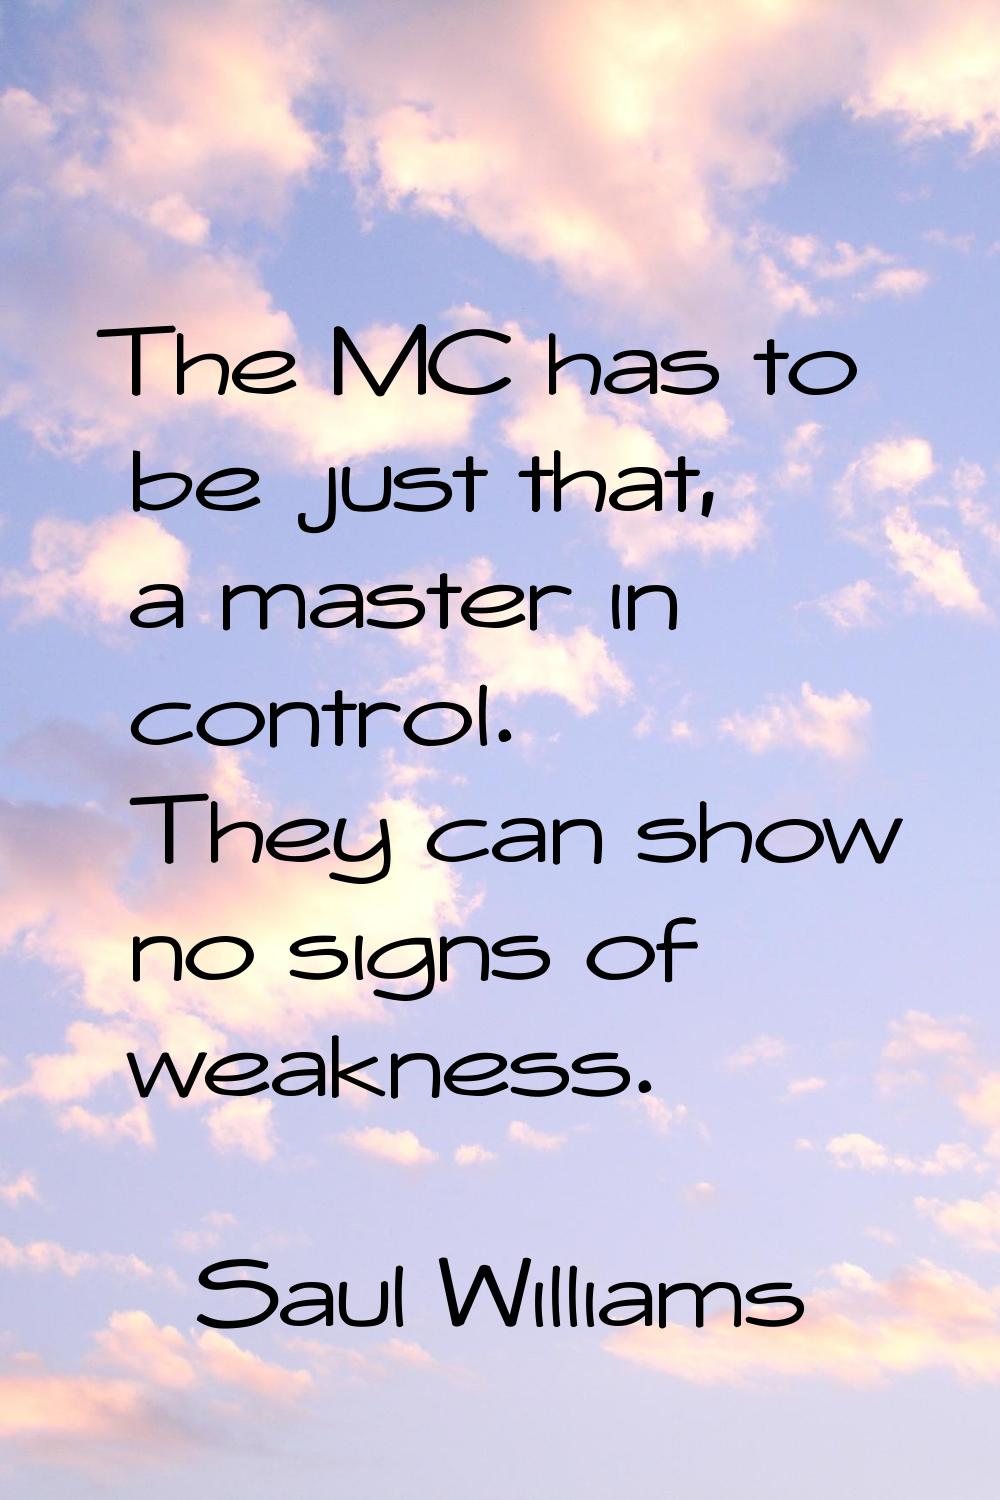 The MC has to be just that, a master in control. They can show no signs of weakness.